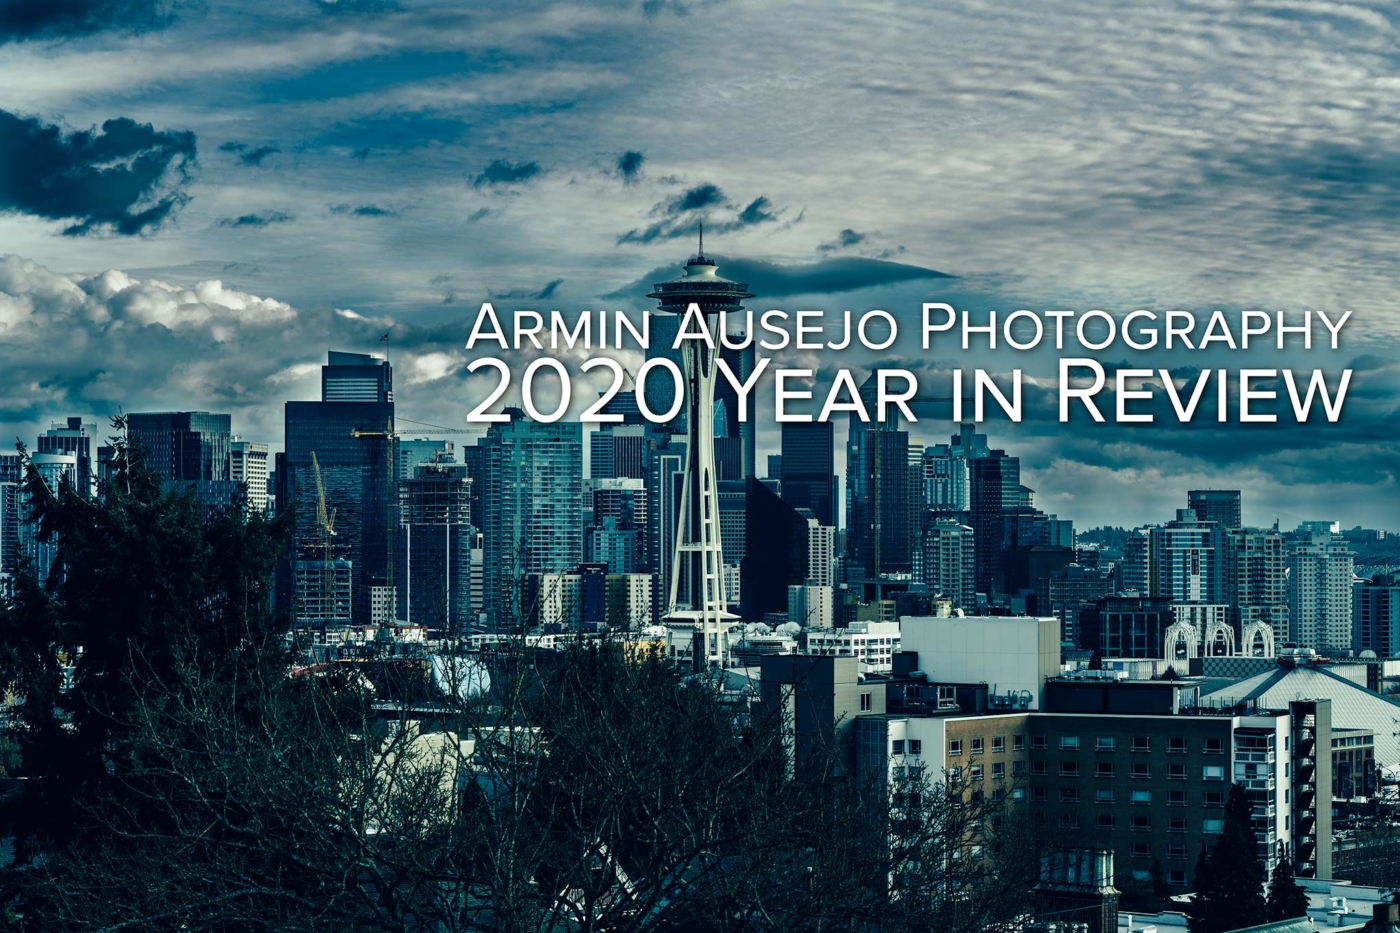 Armin Ausejo Photograph 2020 Year in Review